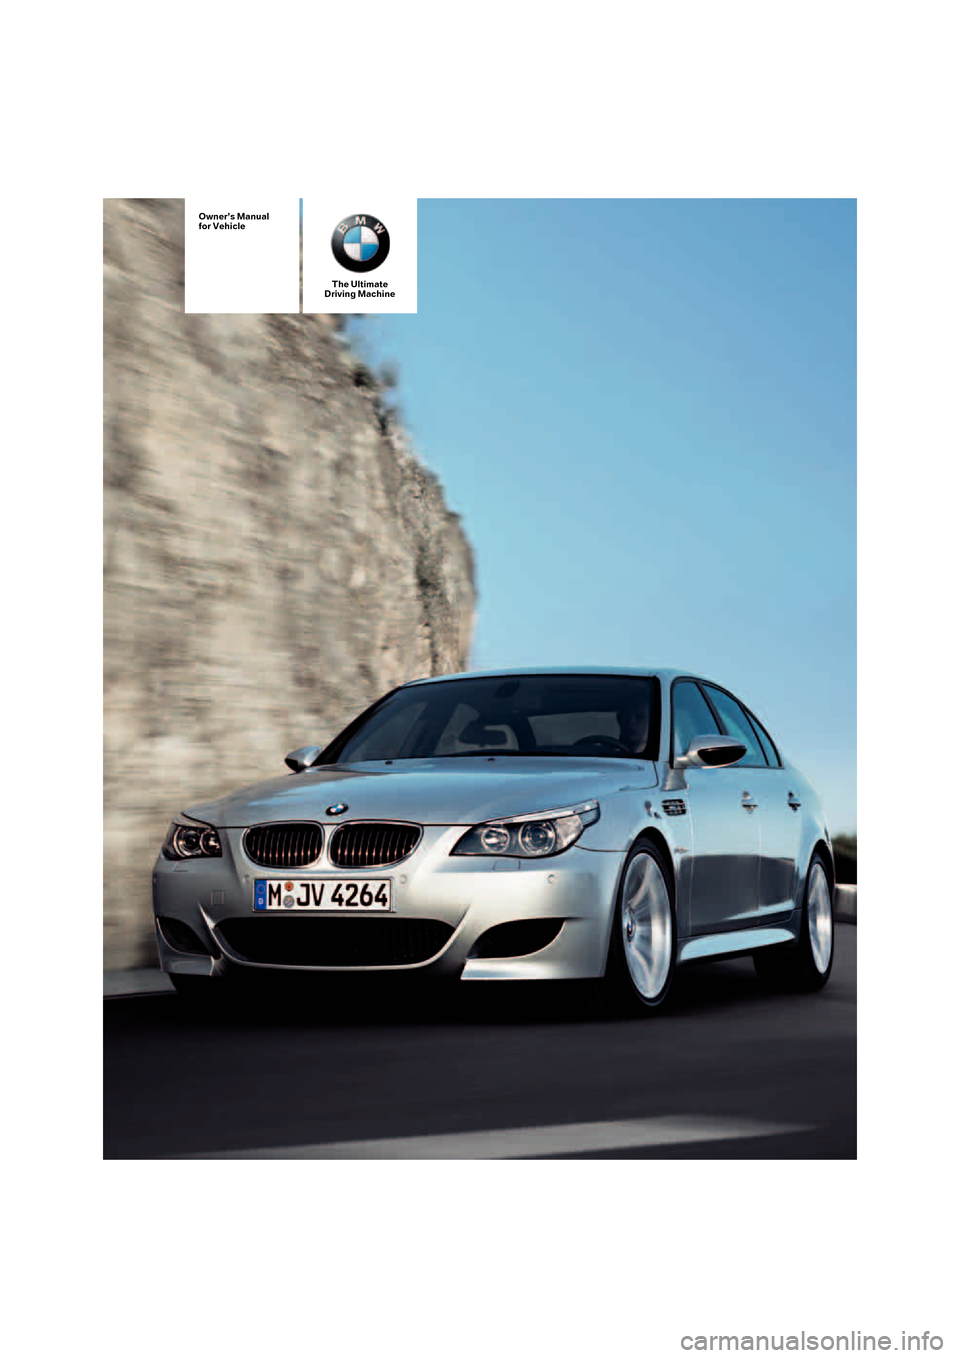 BMW M5 SEDAN 2006 E60 Owners Manual Owner’s Manual
for Vehicle
The Ultimate
Driving Machine 